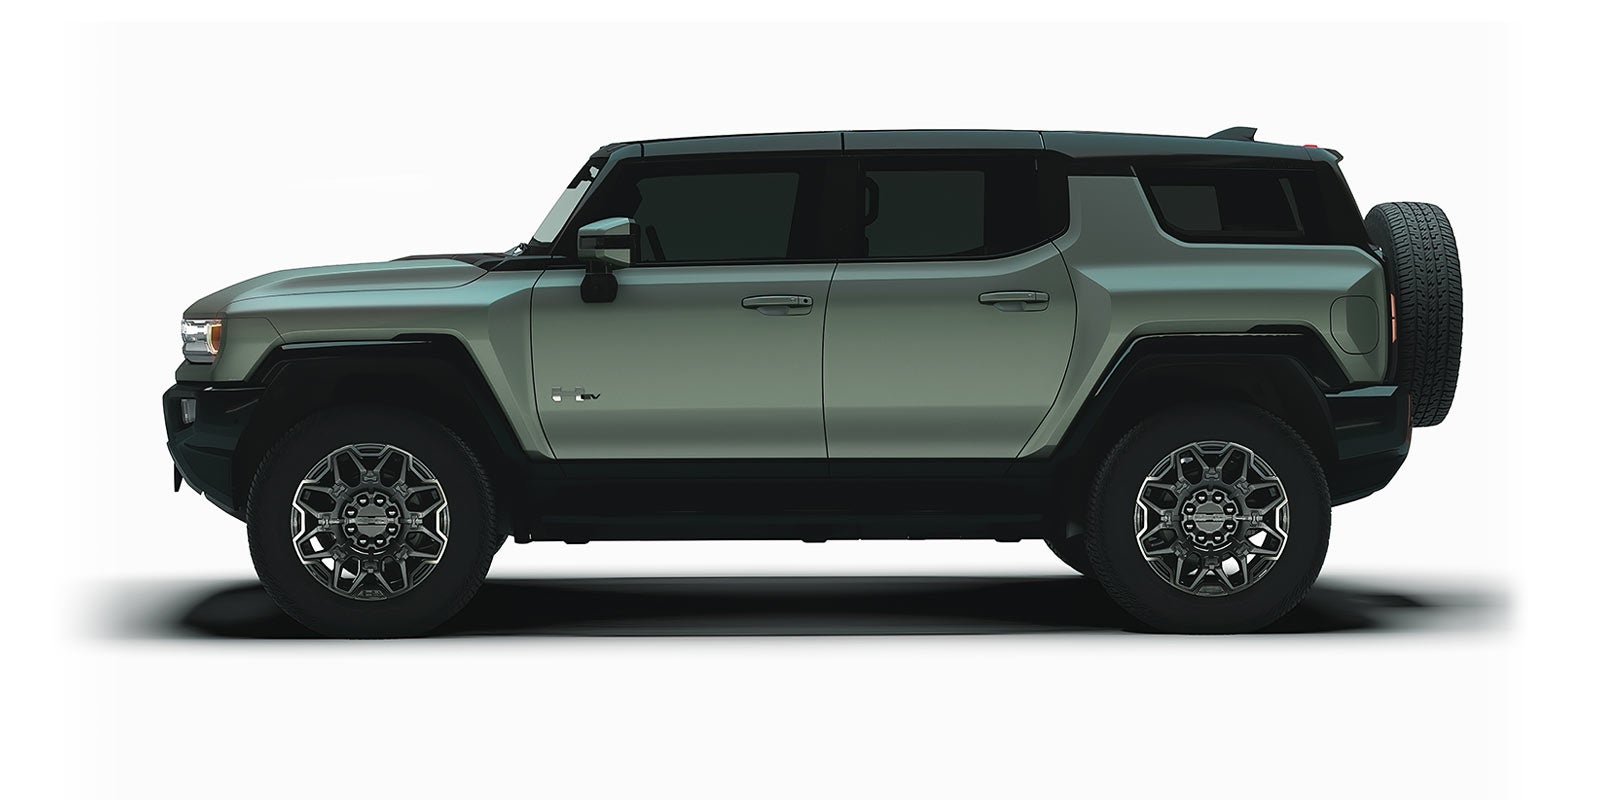 hummer ev pickup and hummer ev | Coughlin Chevrolet Buick GMC of Circleville in Circleville OH